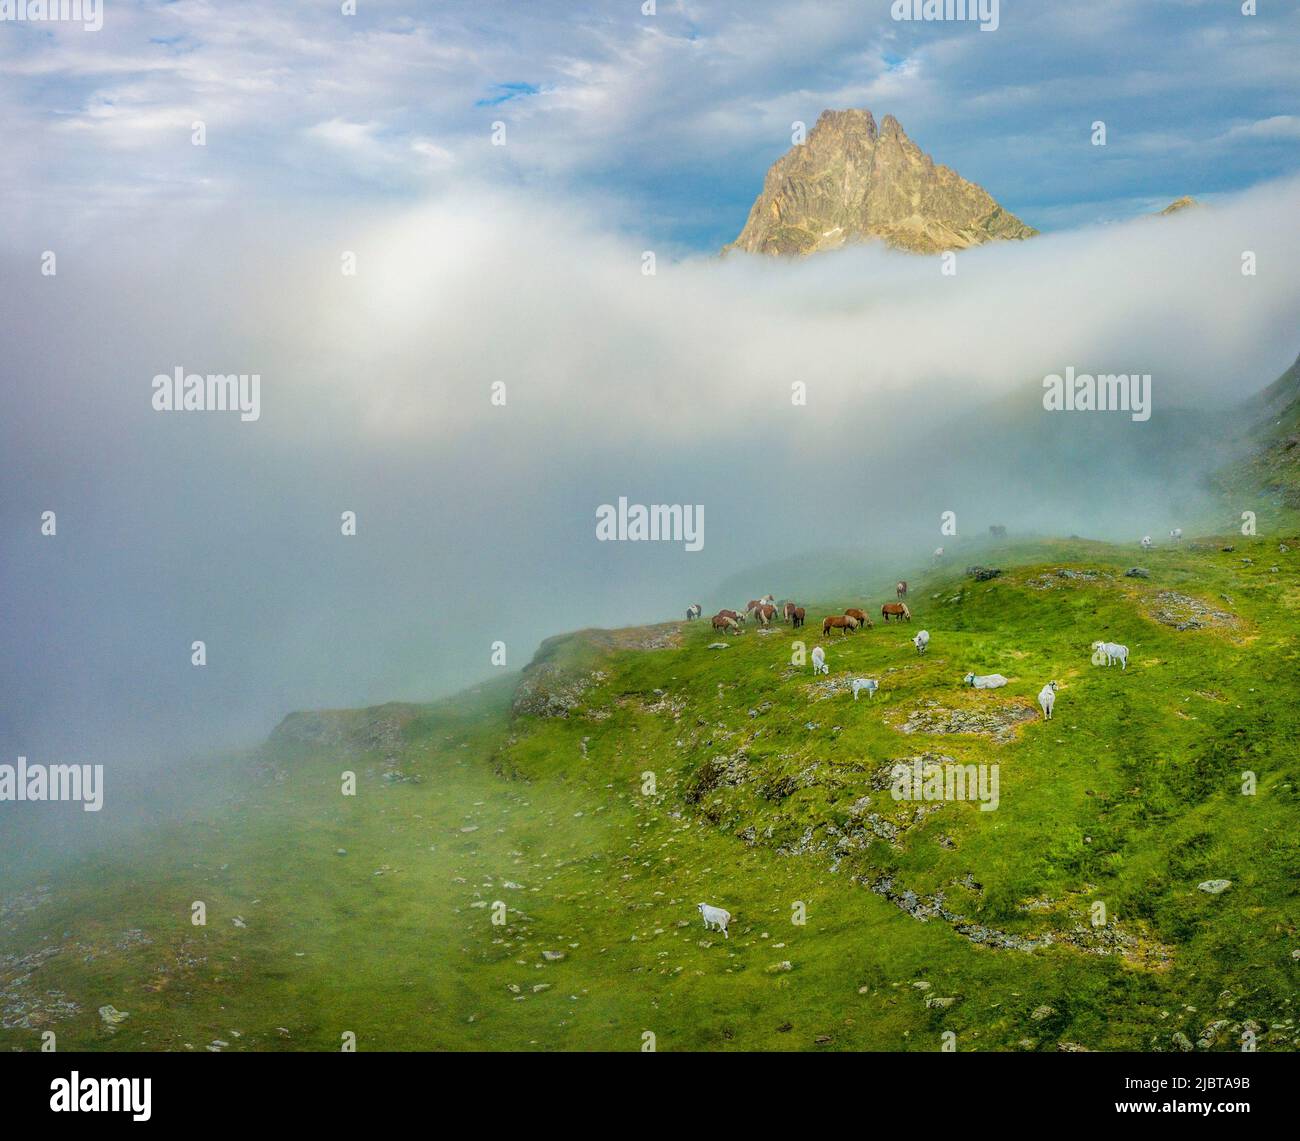 France, Pyrenees Atlantiques, Le Pic d'Ossau, horses and cows in mountain pastures (aerial view) Stock Photo